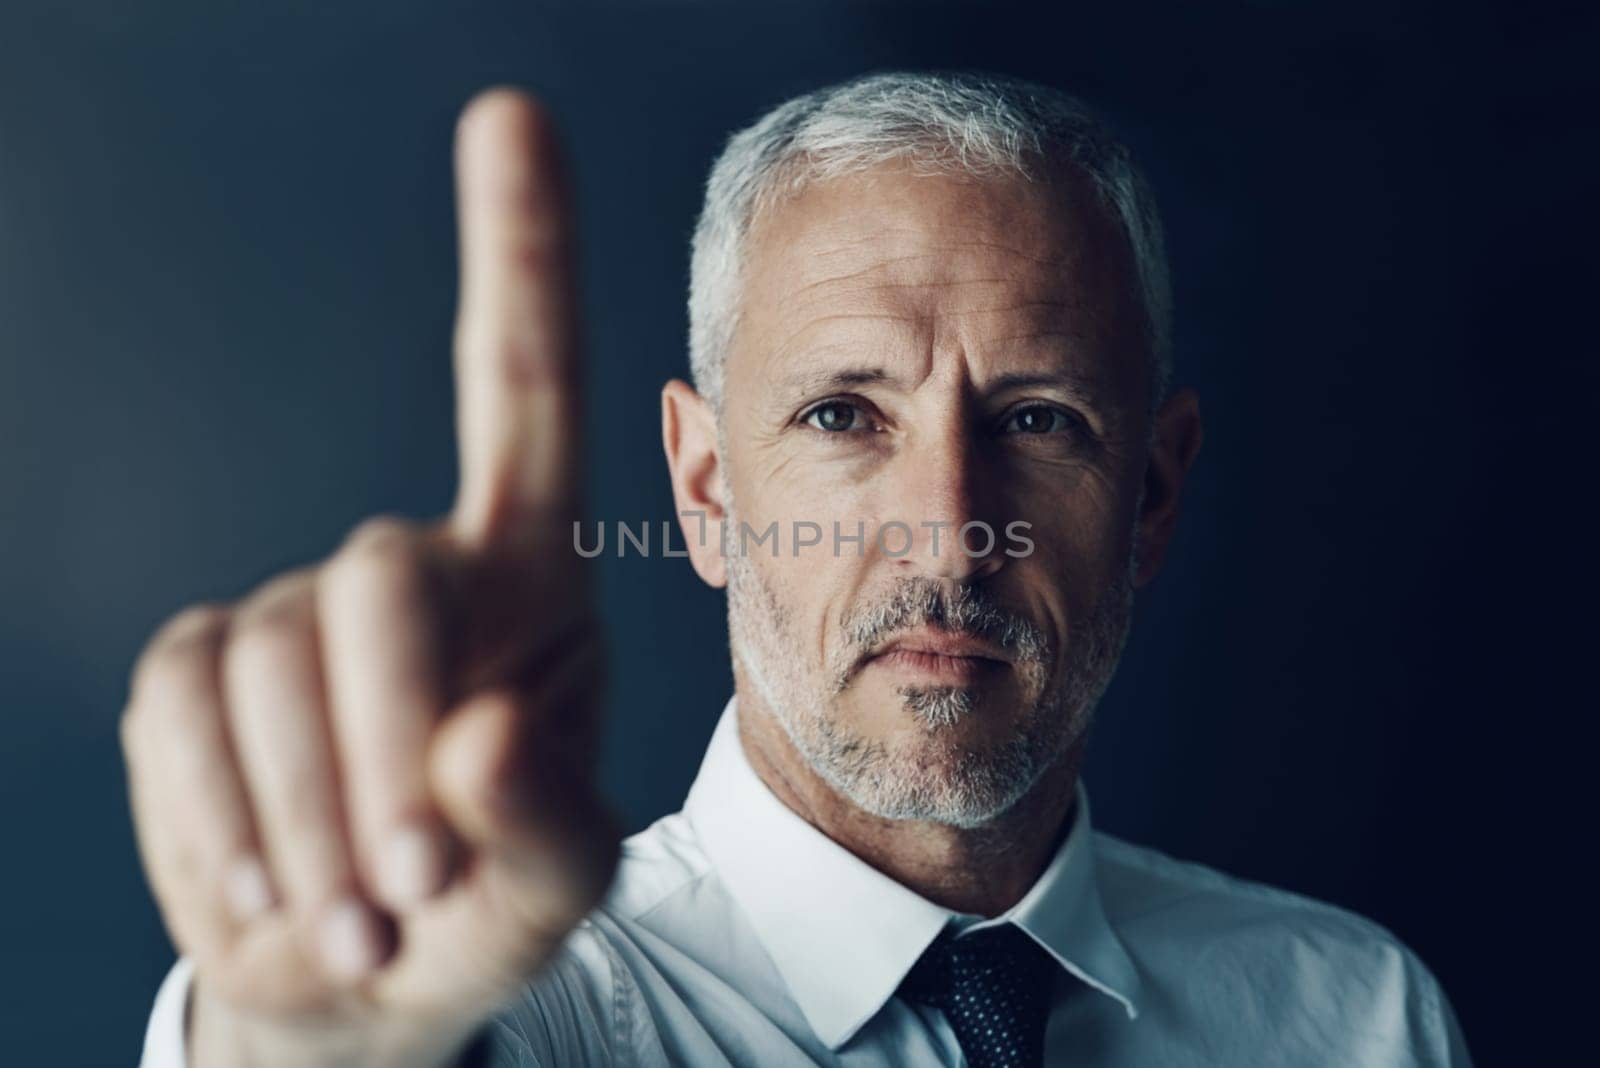 Swiping his way to success. Portrait of a focussed businessman holding up his finger as if using a touchscreen in the office